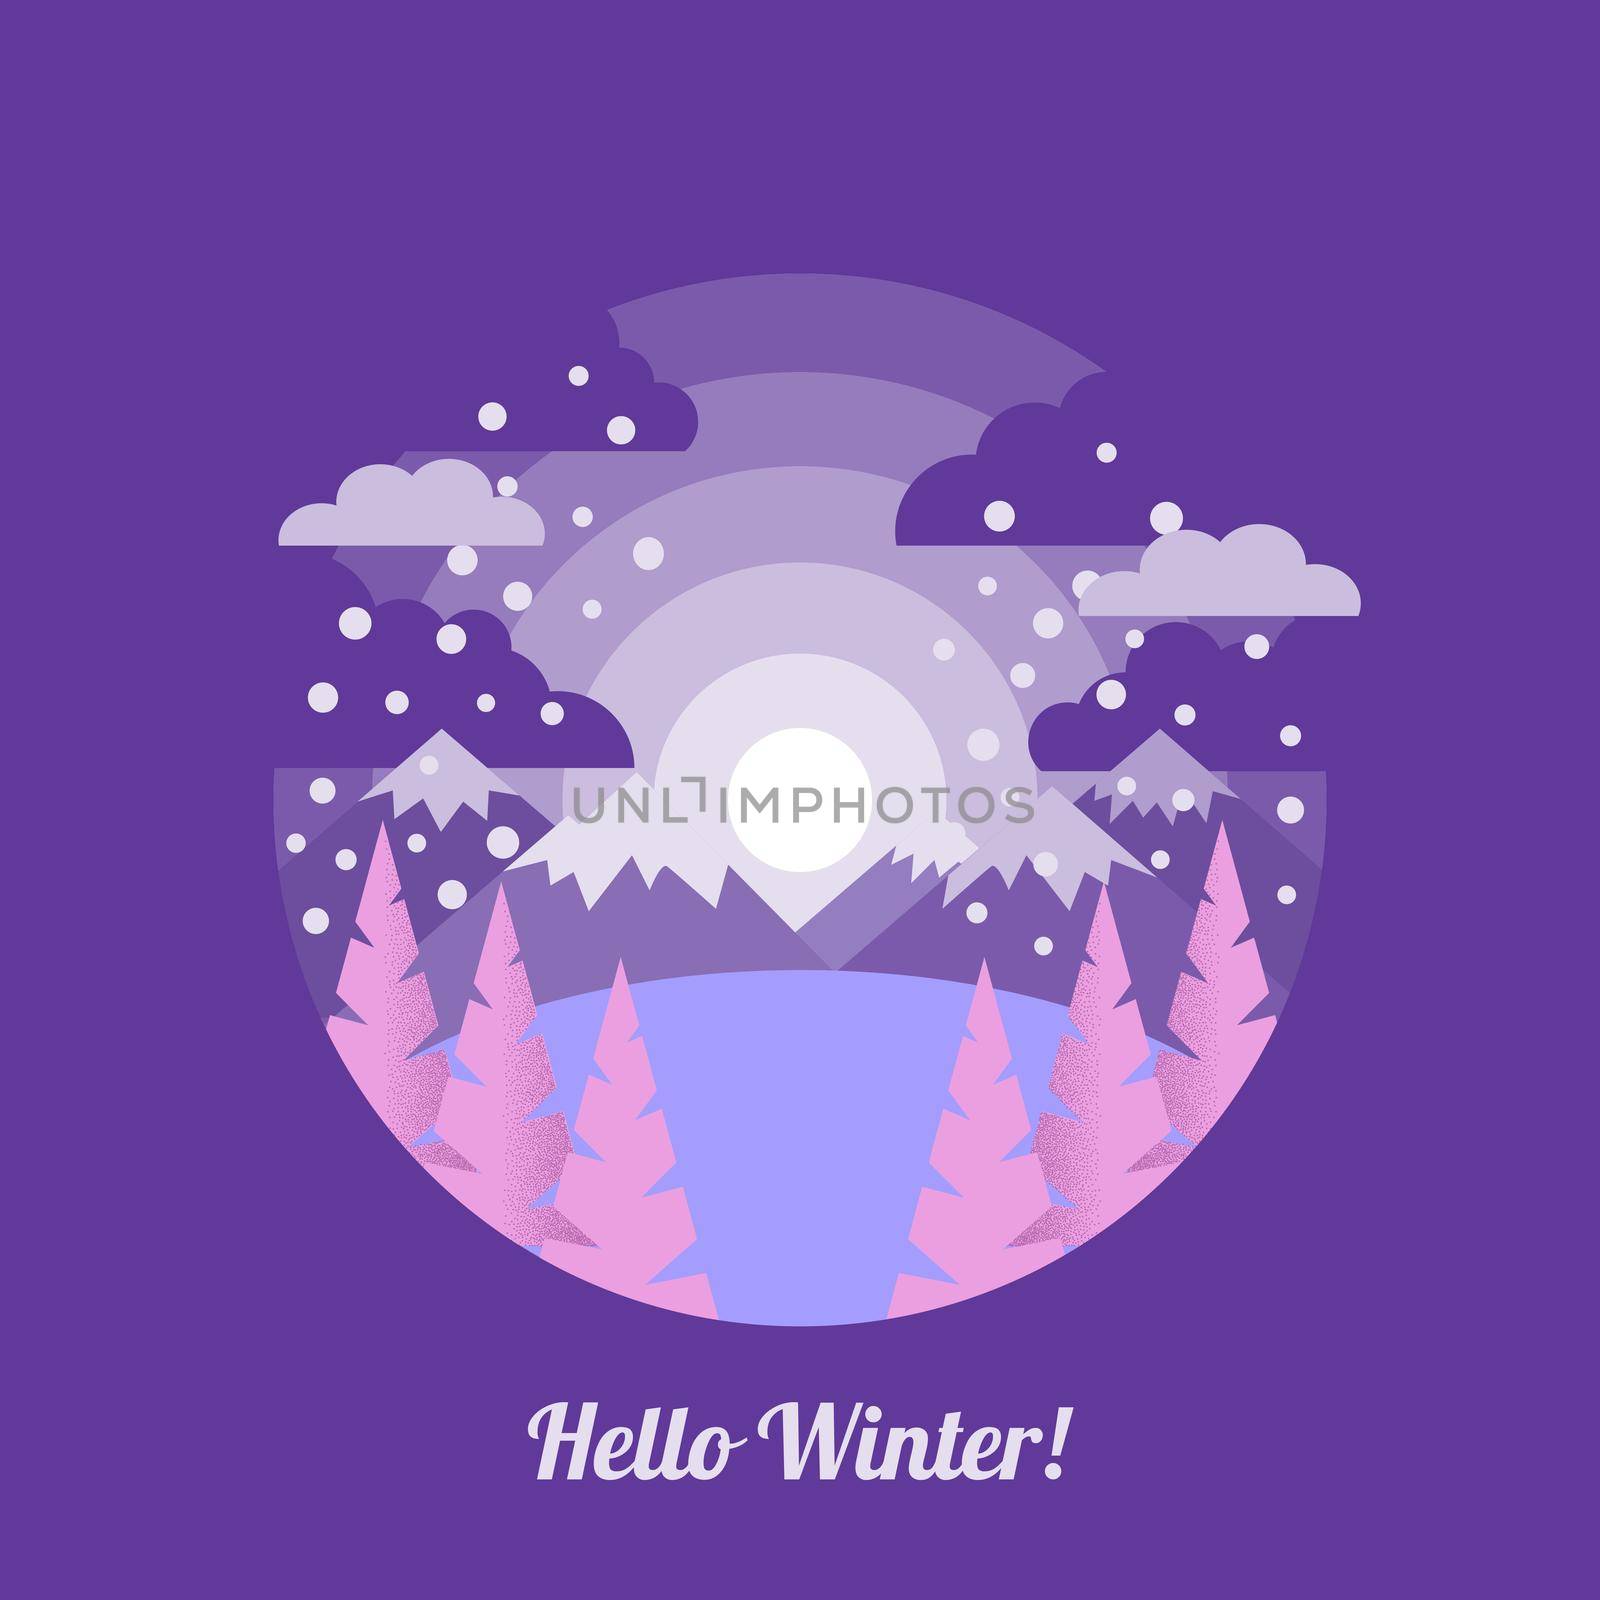 Winter landscape in flat style and inscription Hello winter . illustration for greeting cards, posters and much more.